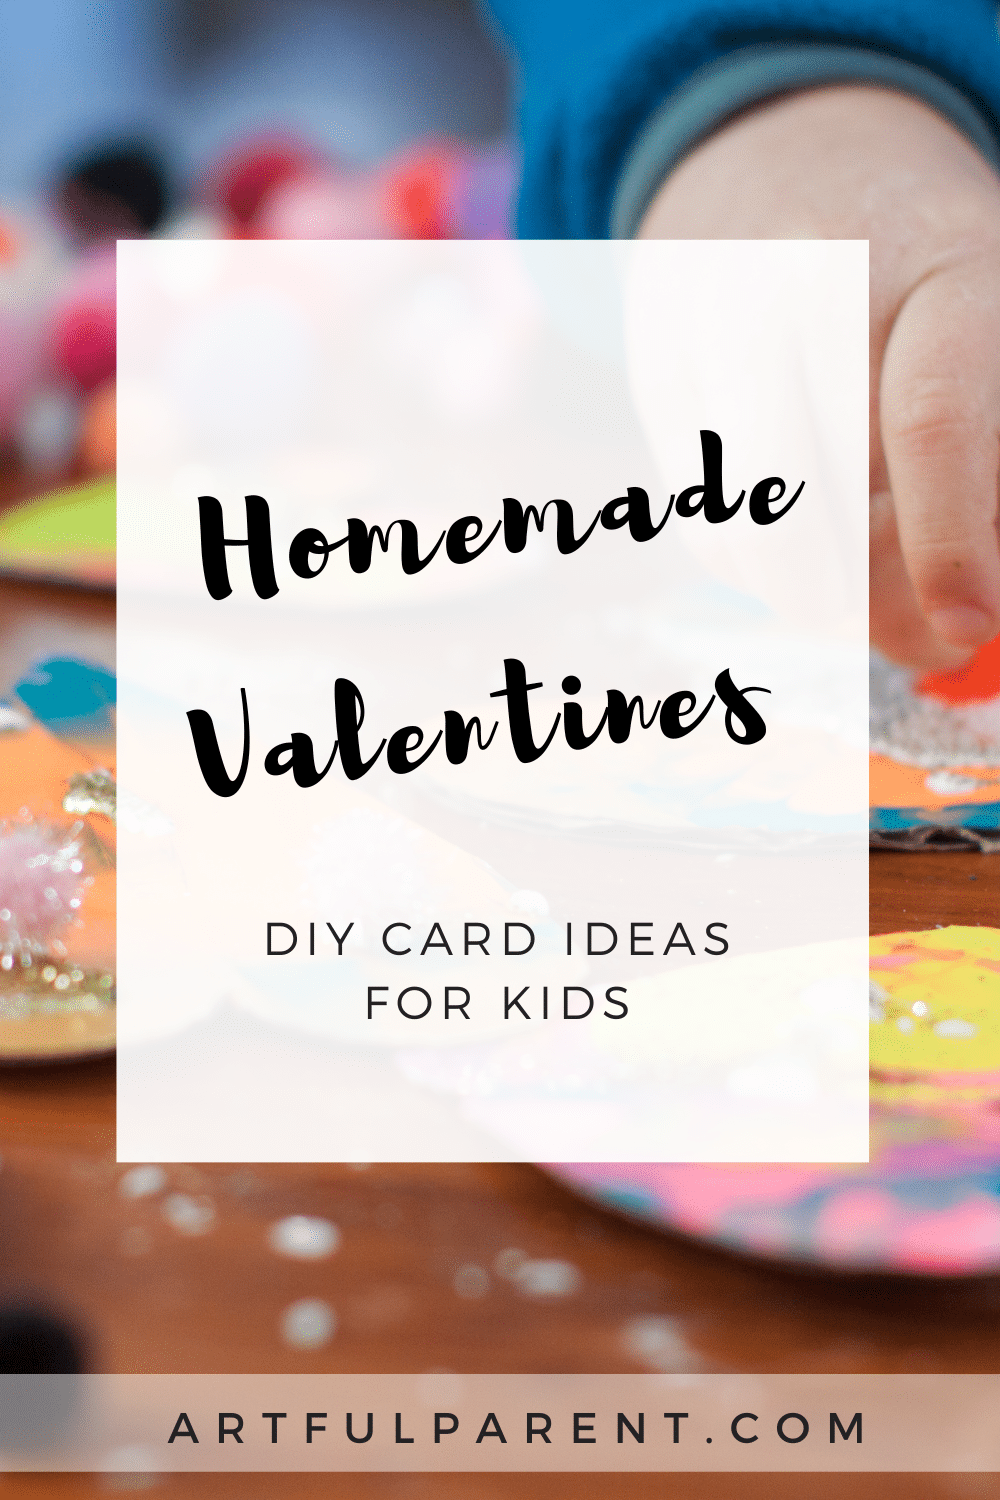 12 Homemade Valentines Cards for Kids